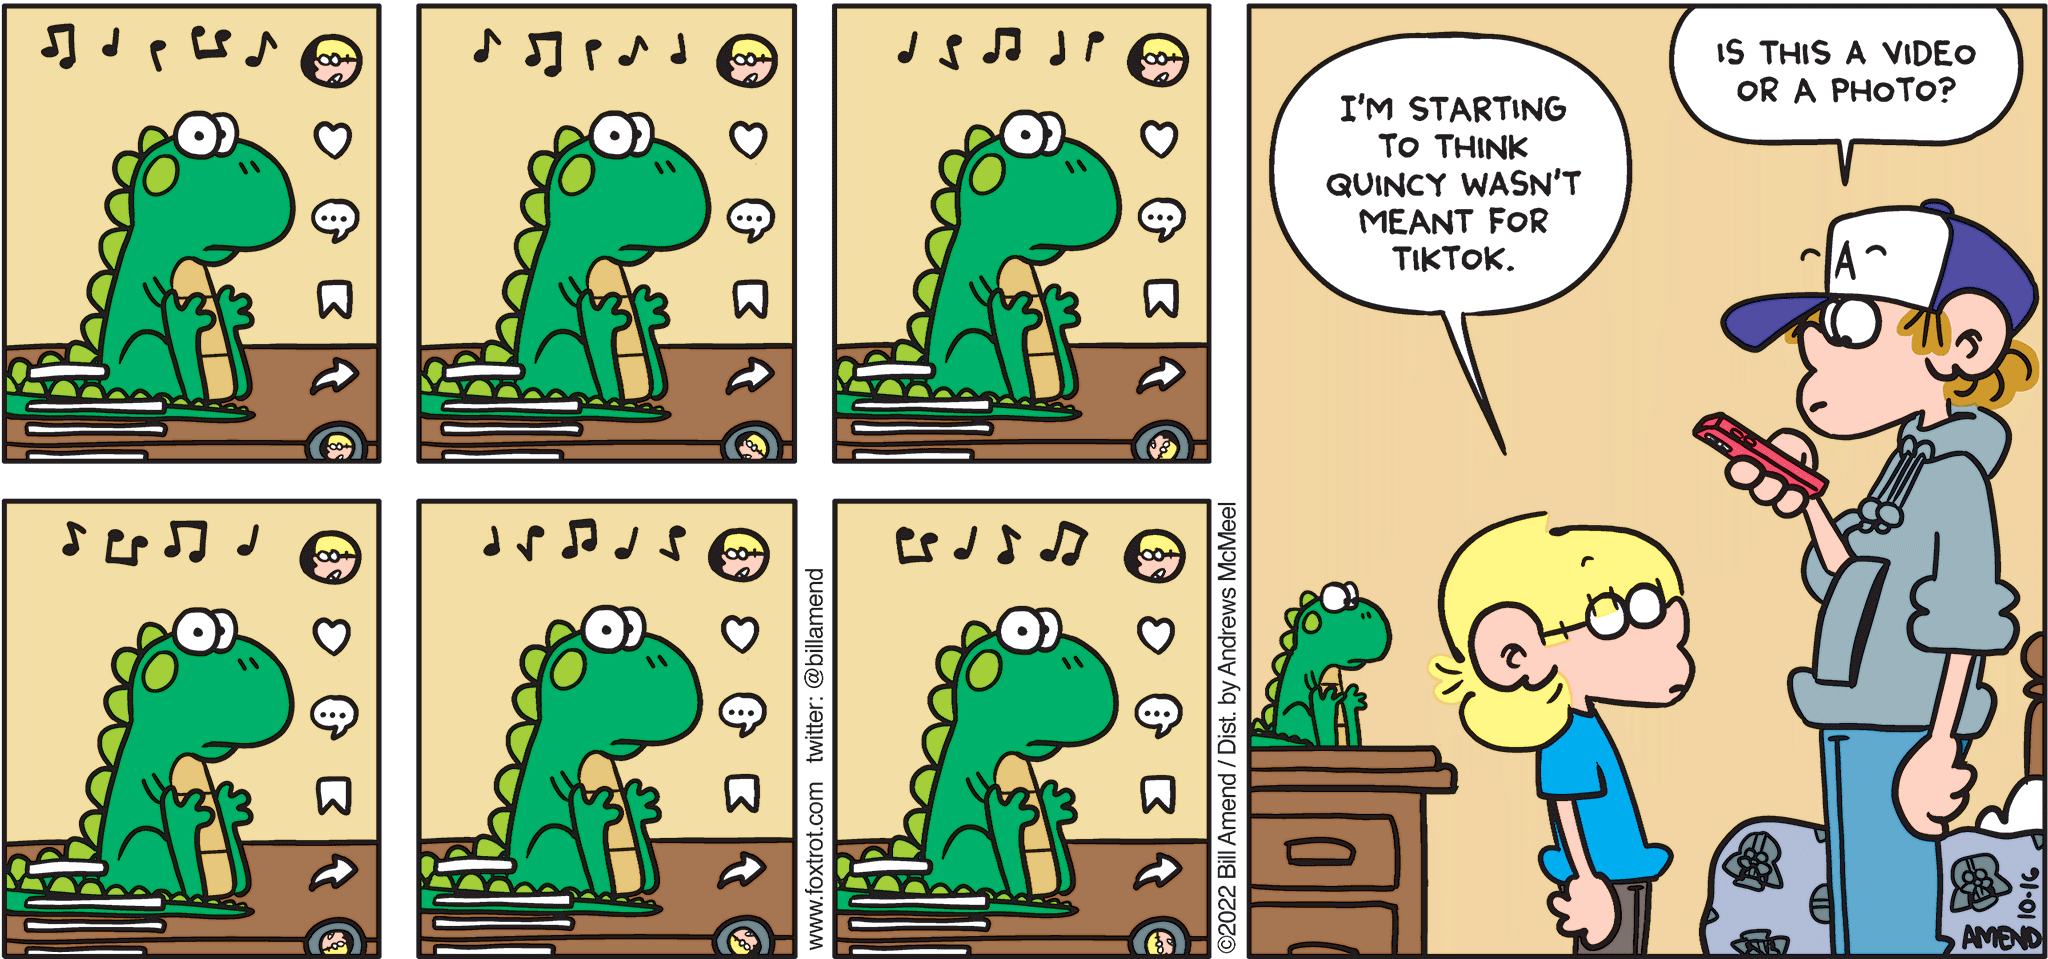 FoxTrot comic strip by Bill Amend - "QuincyTok" published October 16, 2022 - Transcript: Jason Fox: I'm starting to think Quincy wasn't meant for TikTok. Peter Fox: Is this a video or a photo? 